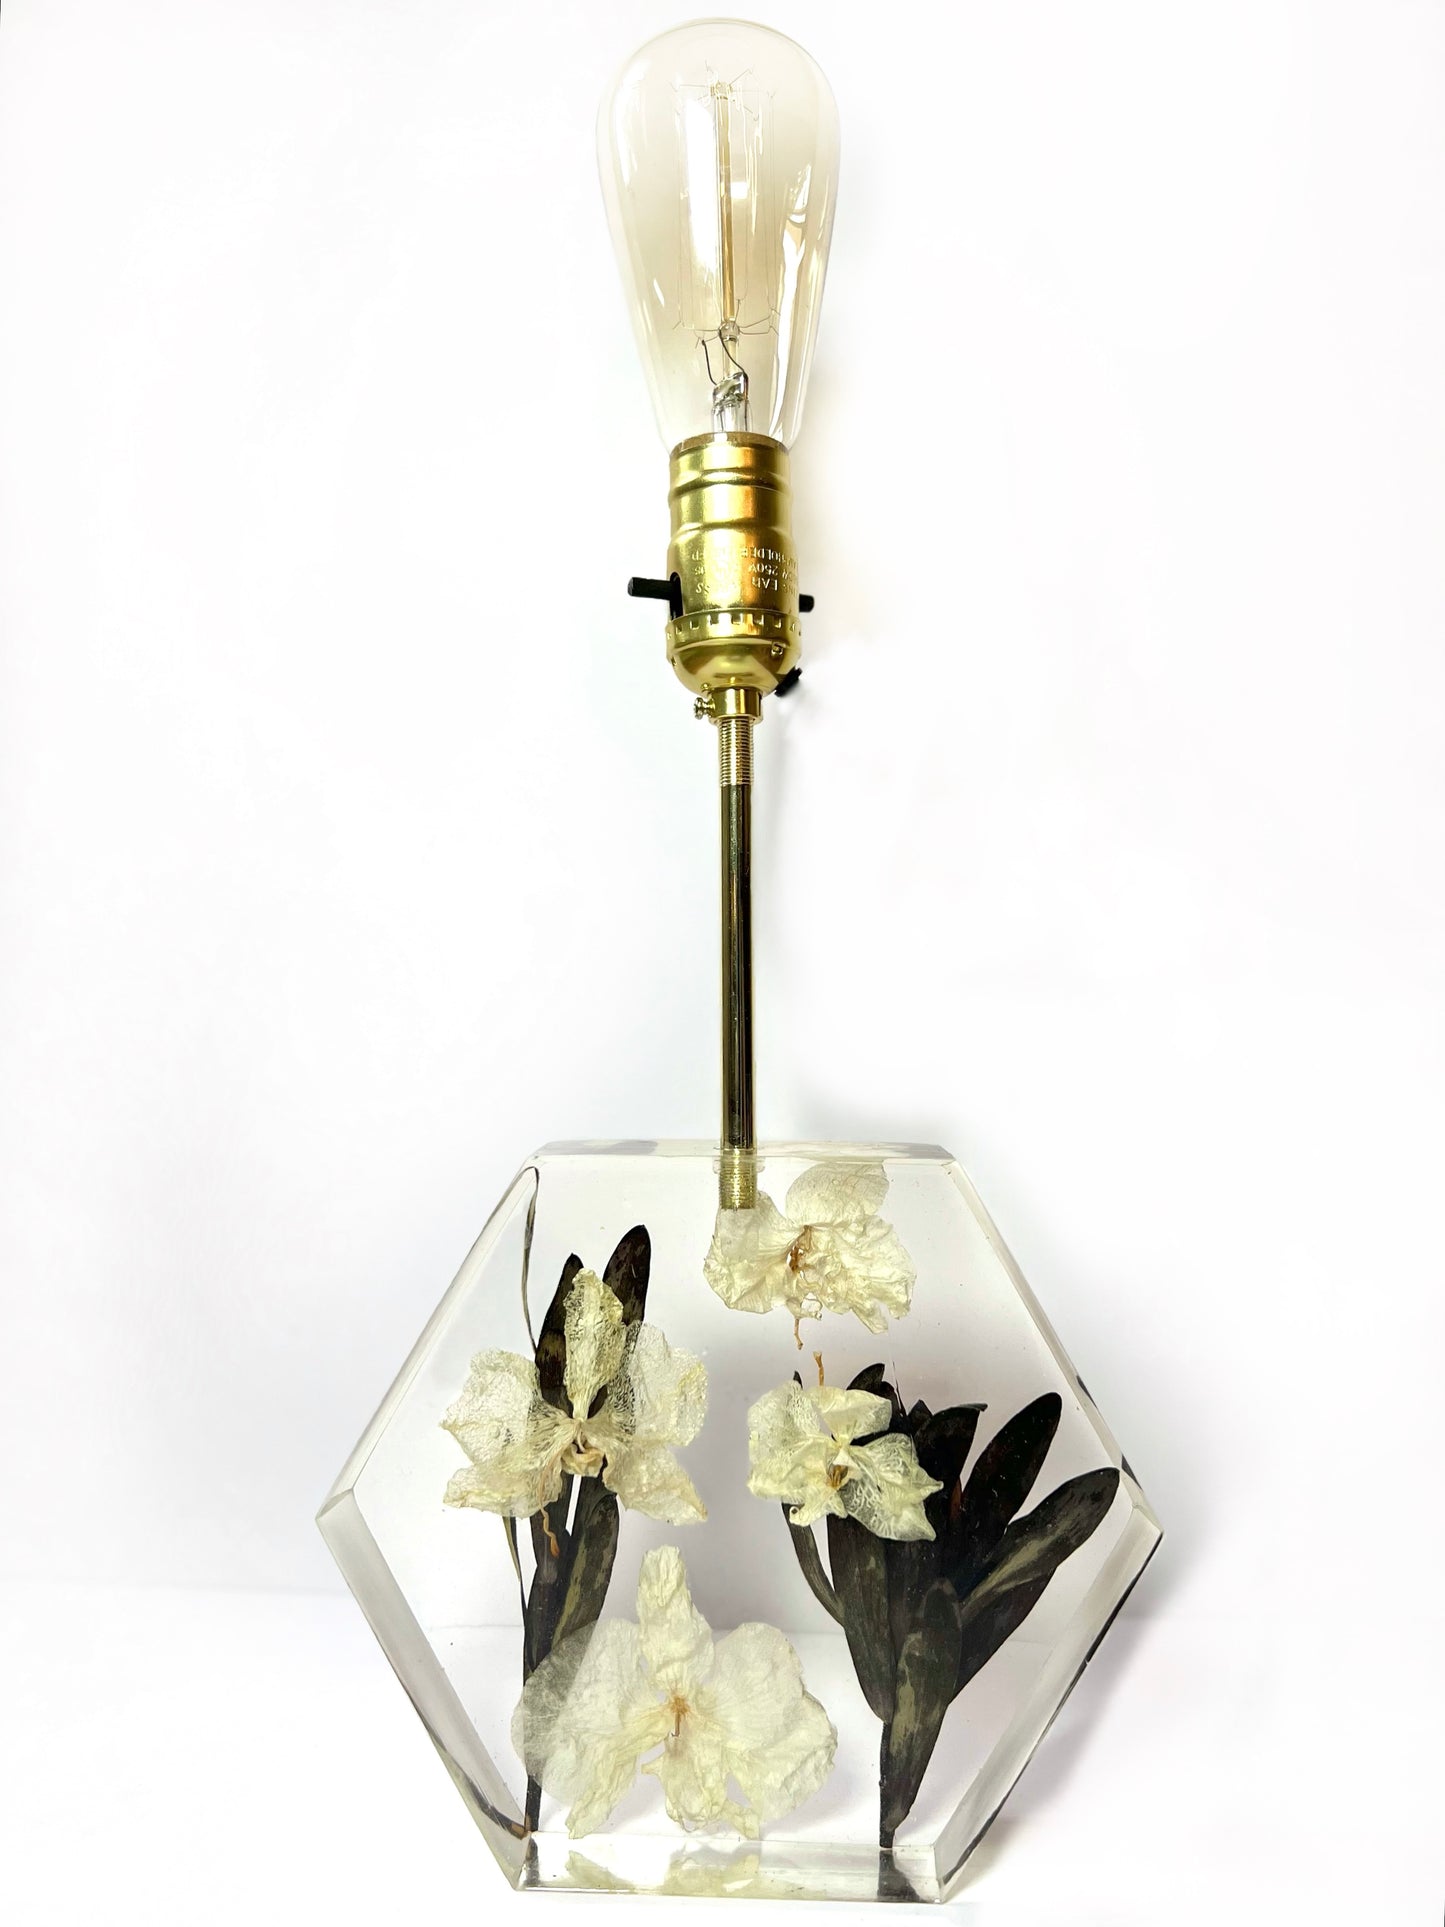 Orchid Lamp